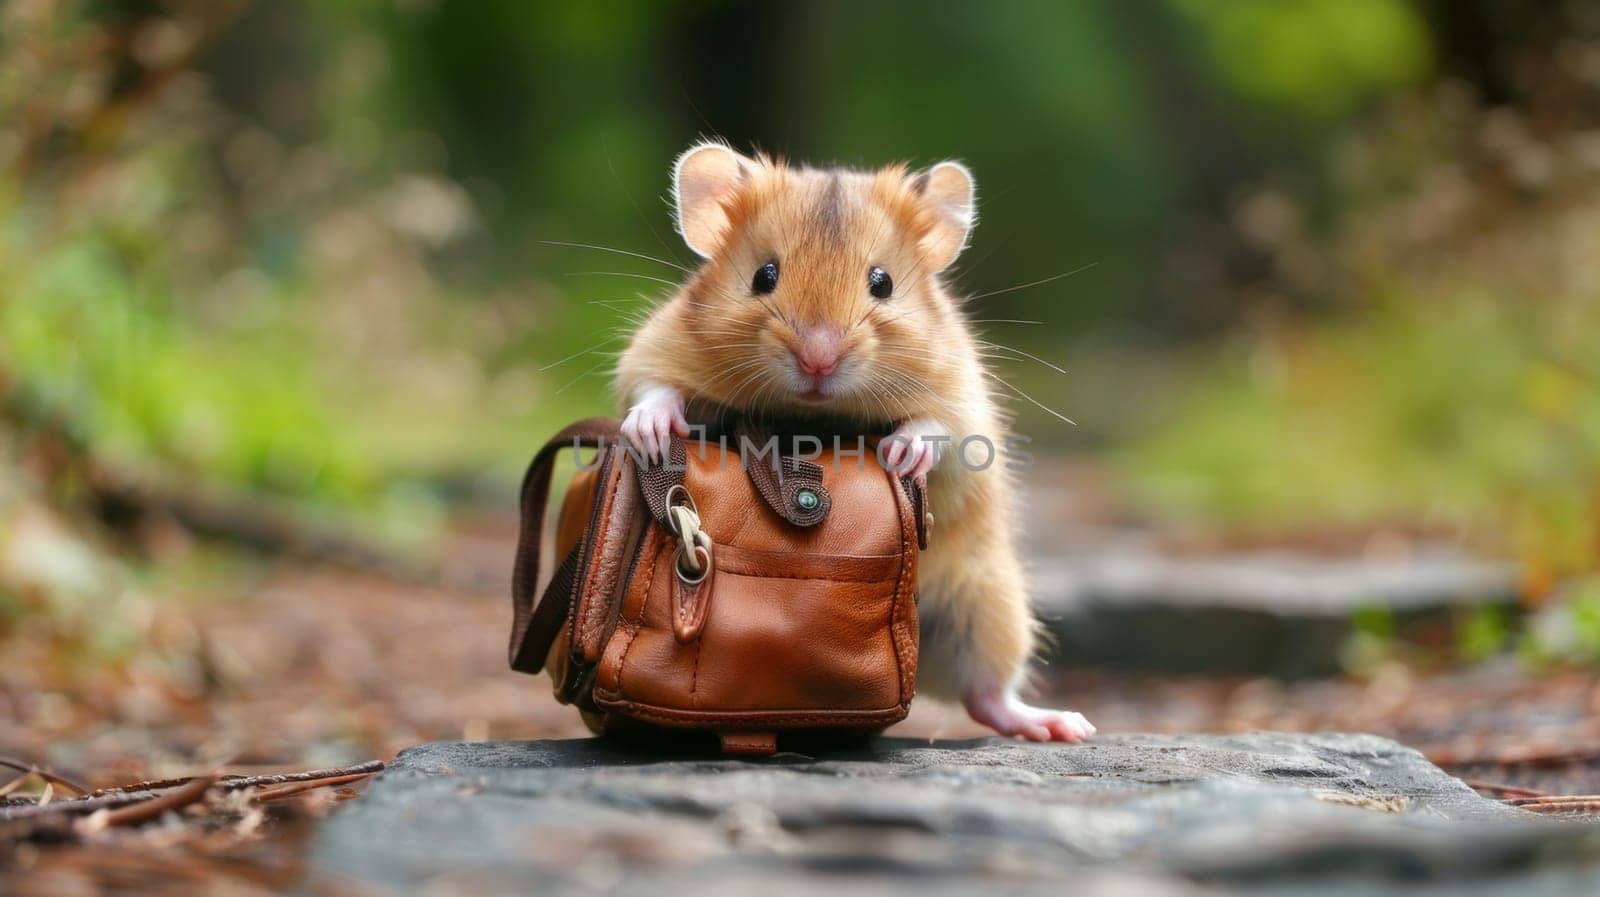 A small brown and white hamster with a purse on its back